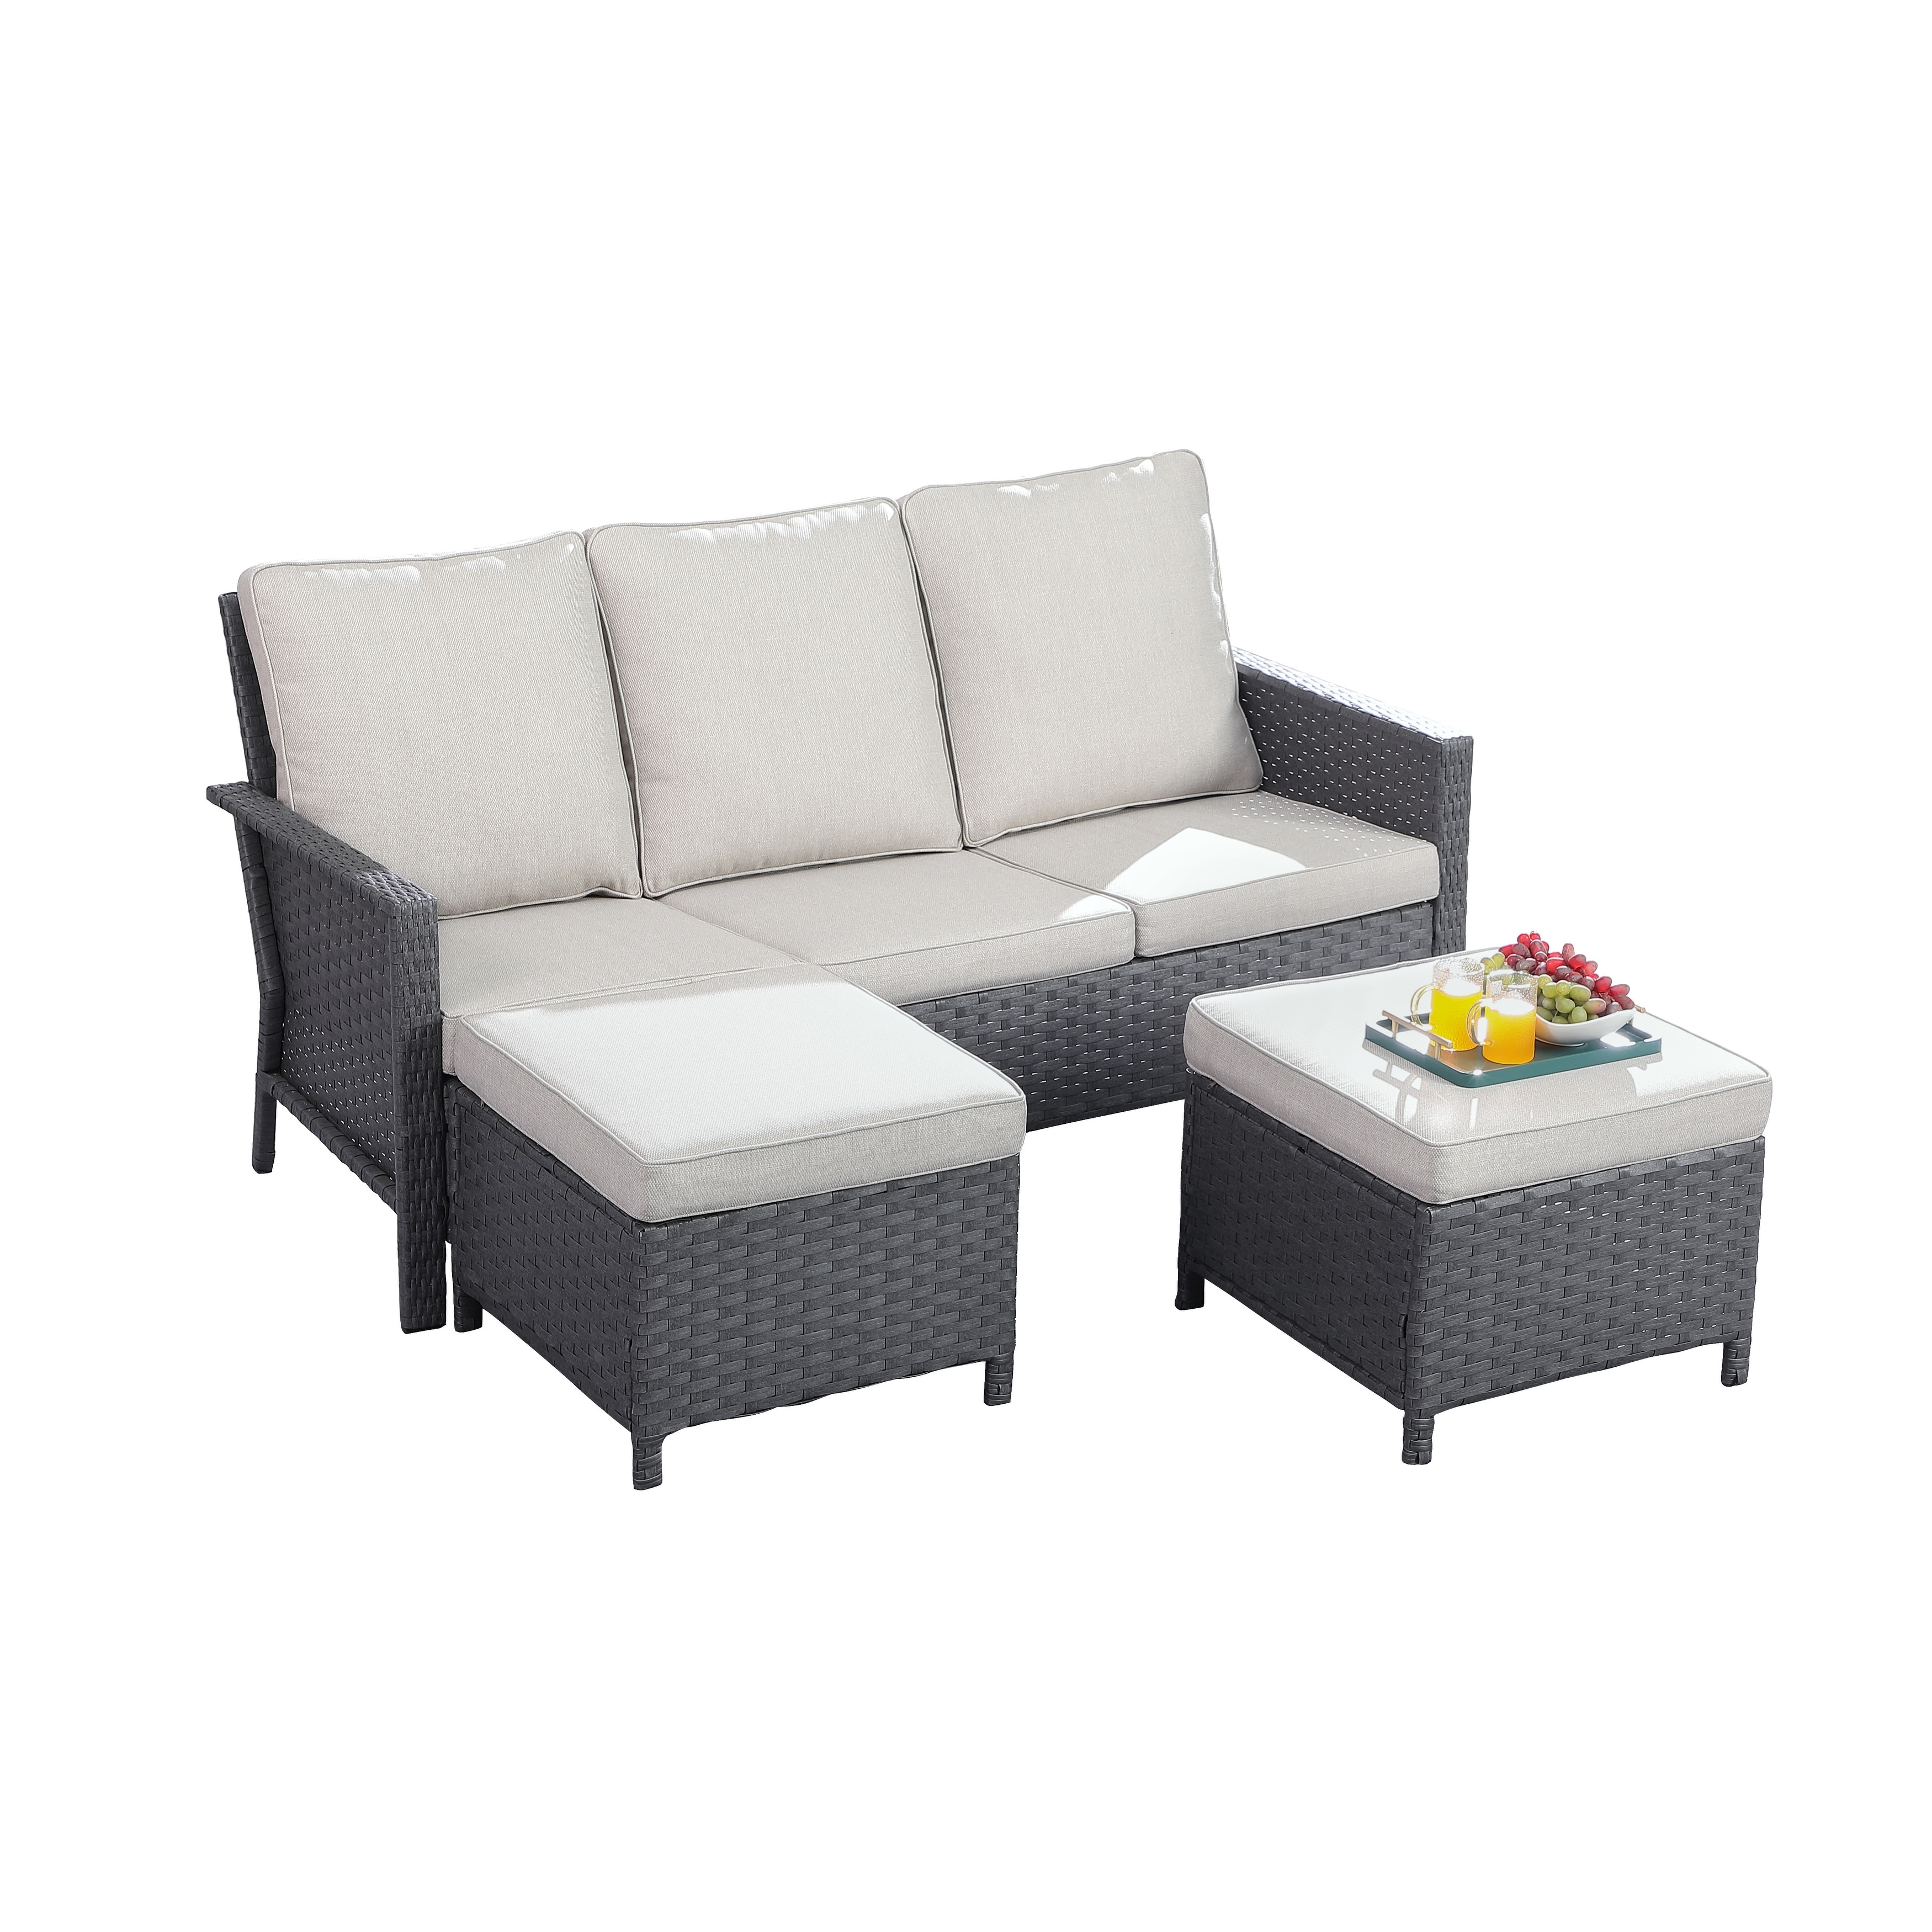 Outdoor Wicker Sectional Sofa Set With Stool Storage And Cushions  Perfect For Patios And Gardens